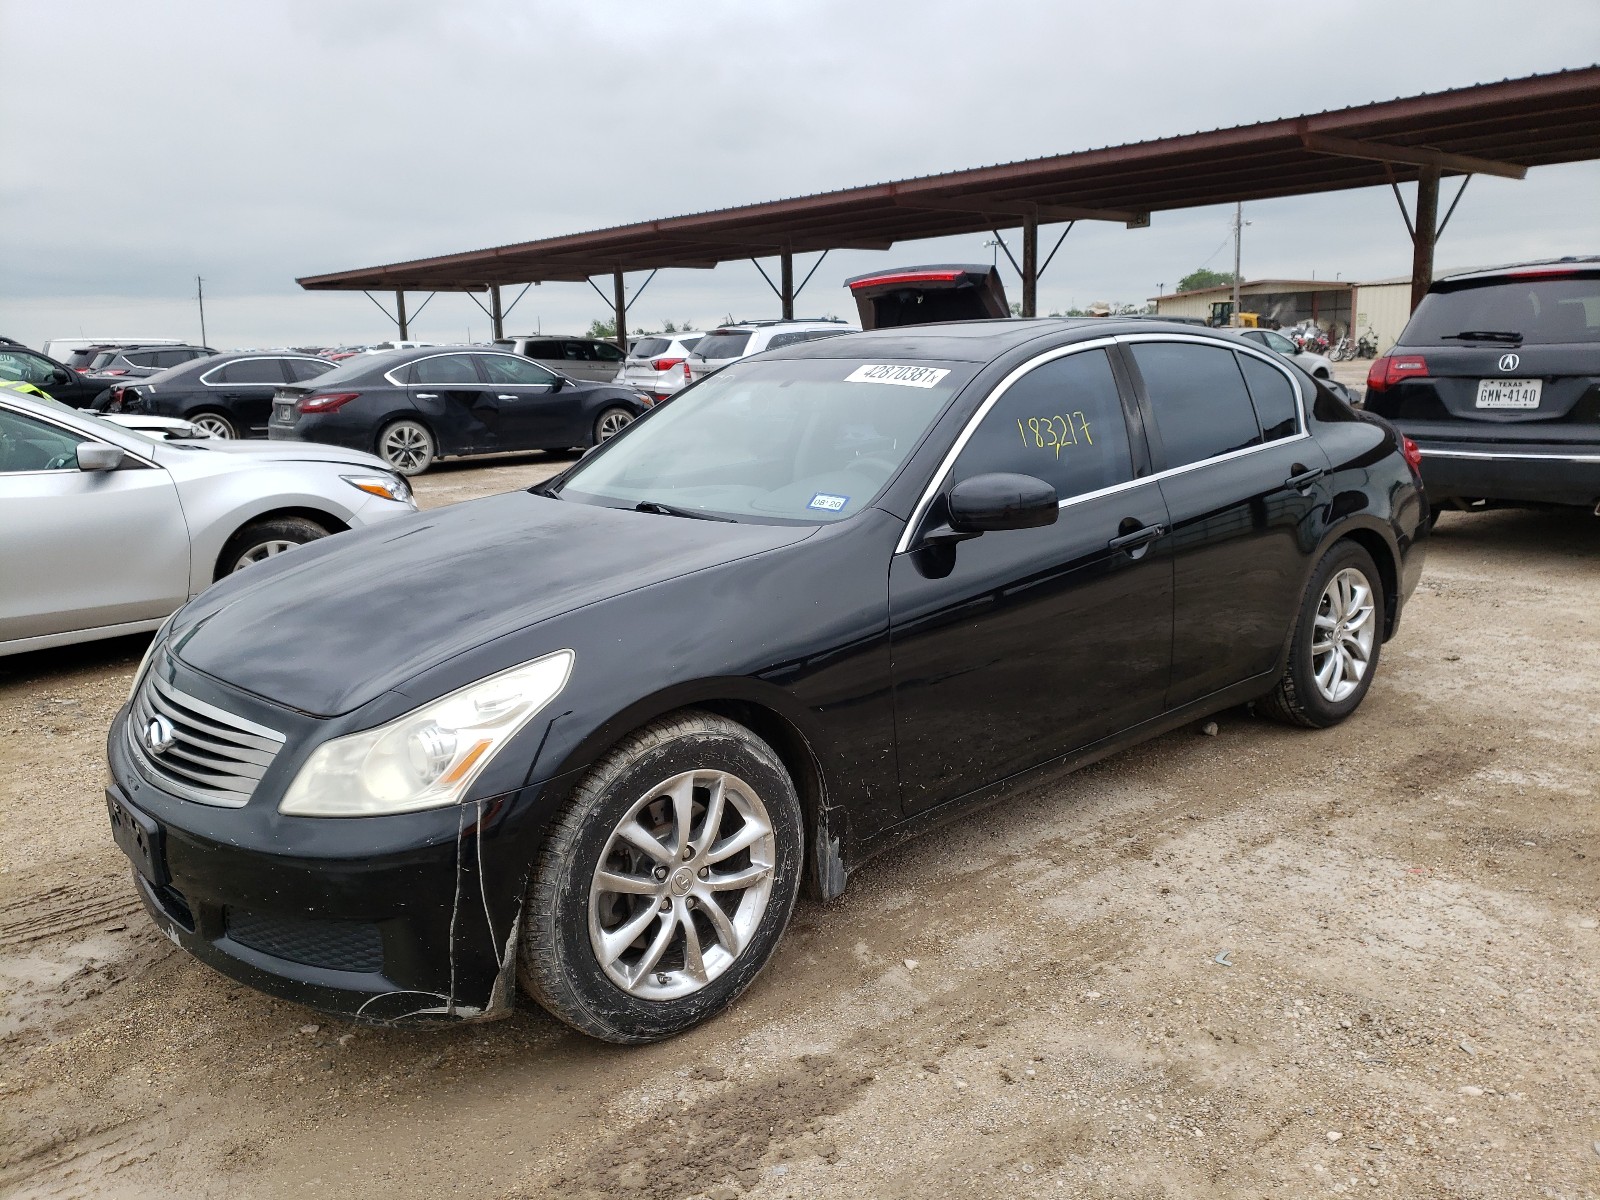 2008 Infiniti G35 for sale at Copart Temple, TX. Lot #42870 